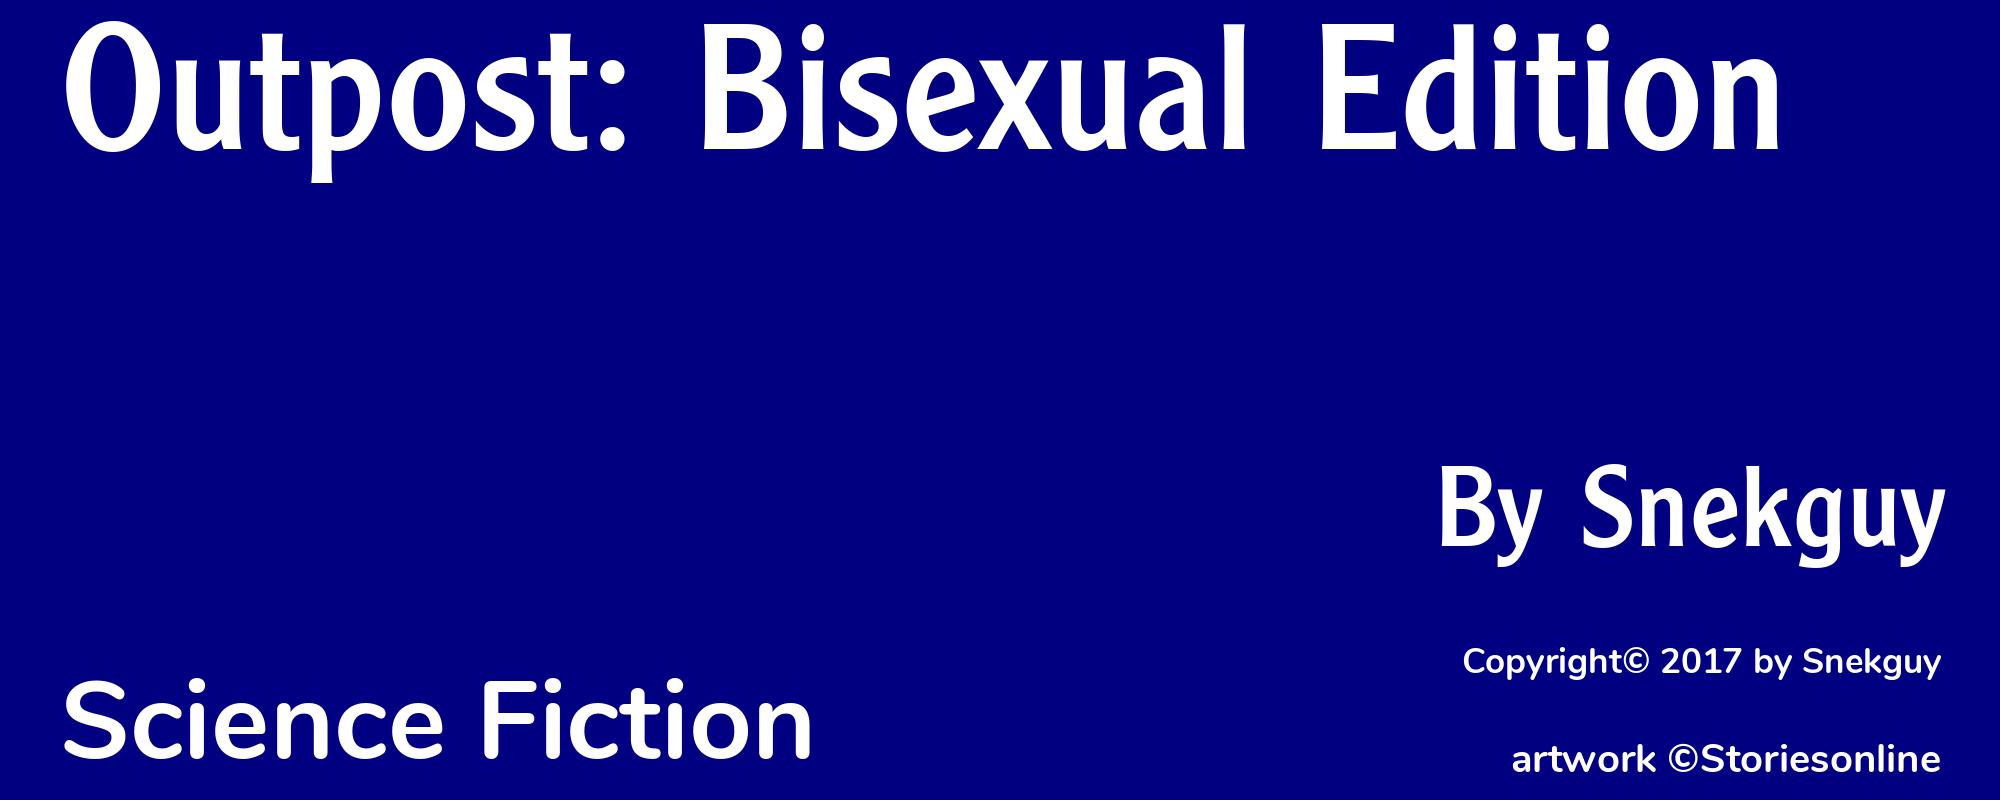 Outpost: Bisexual Edition - Cover